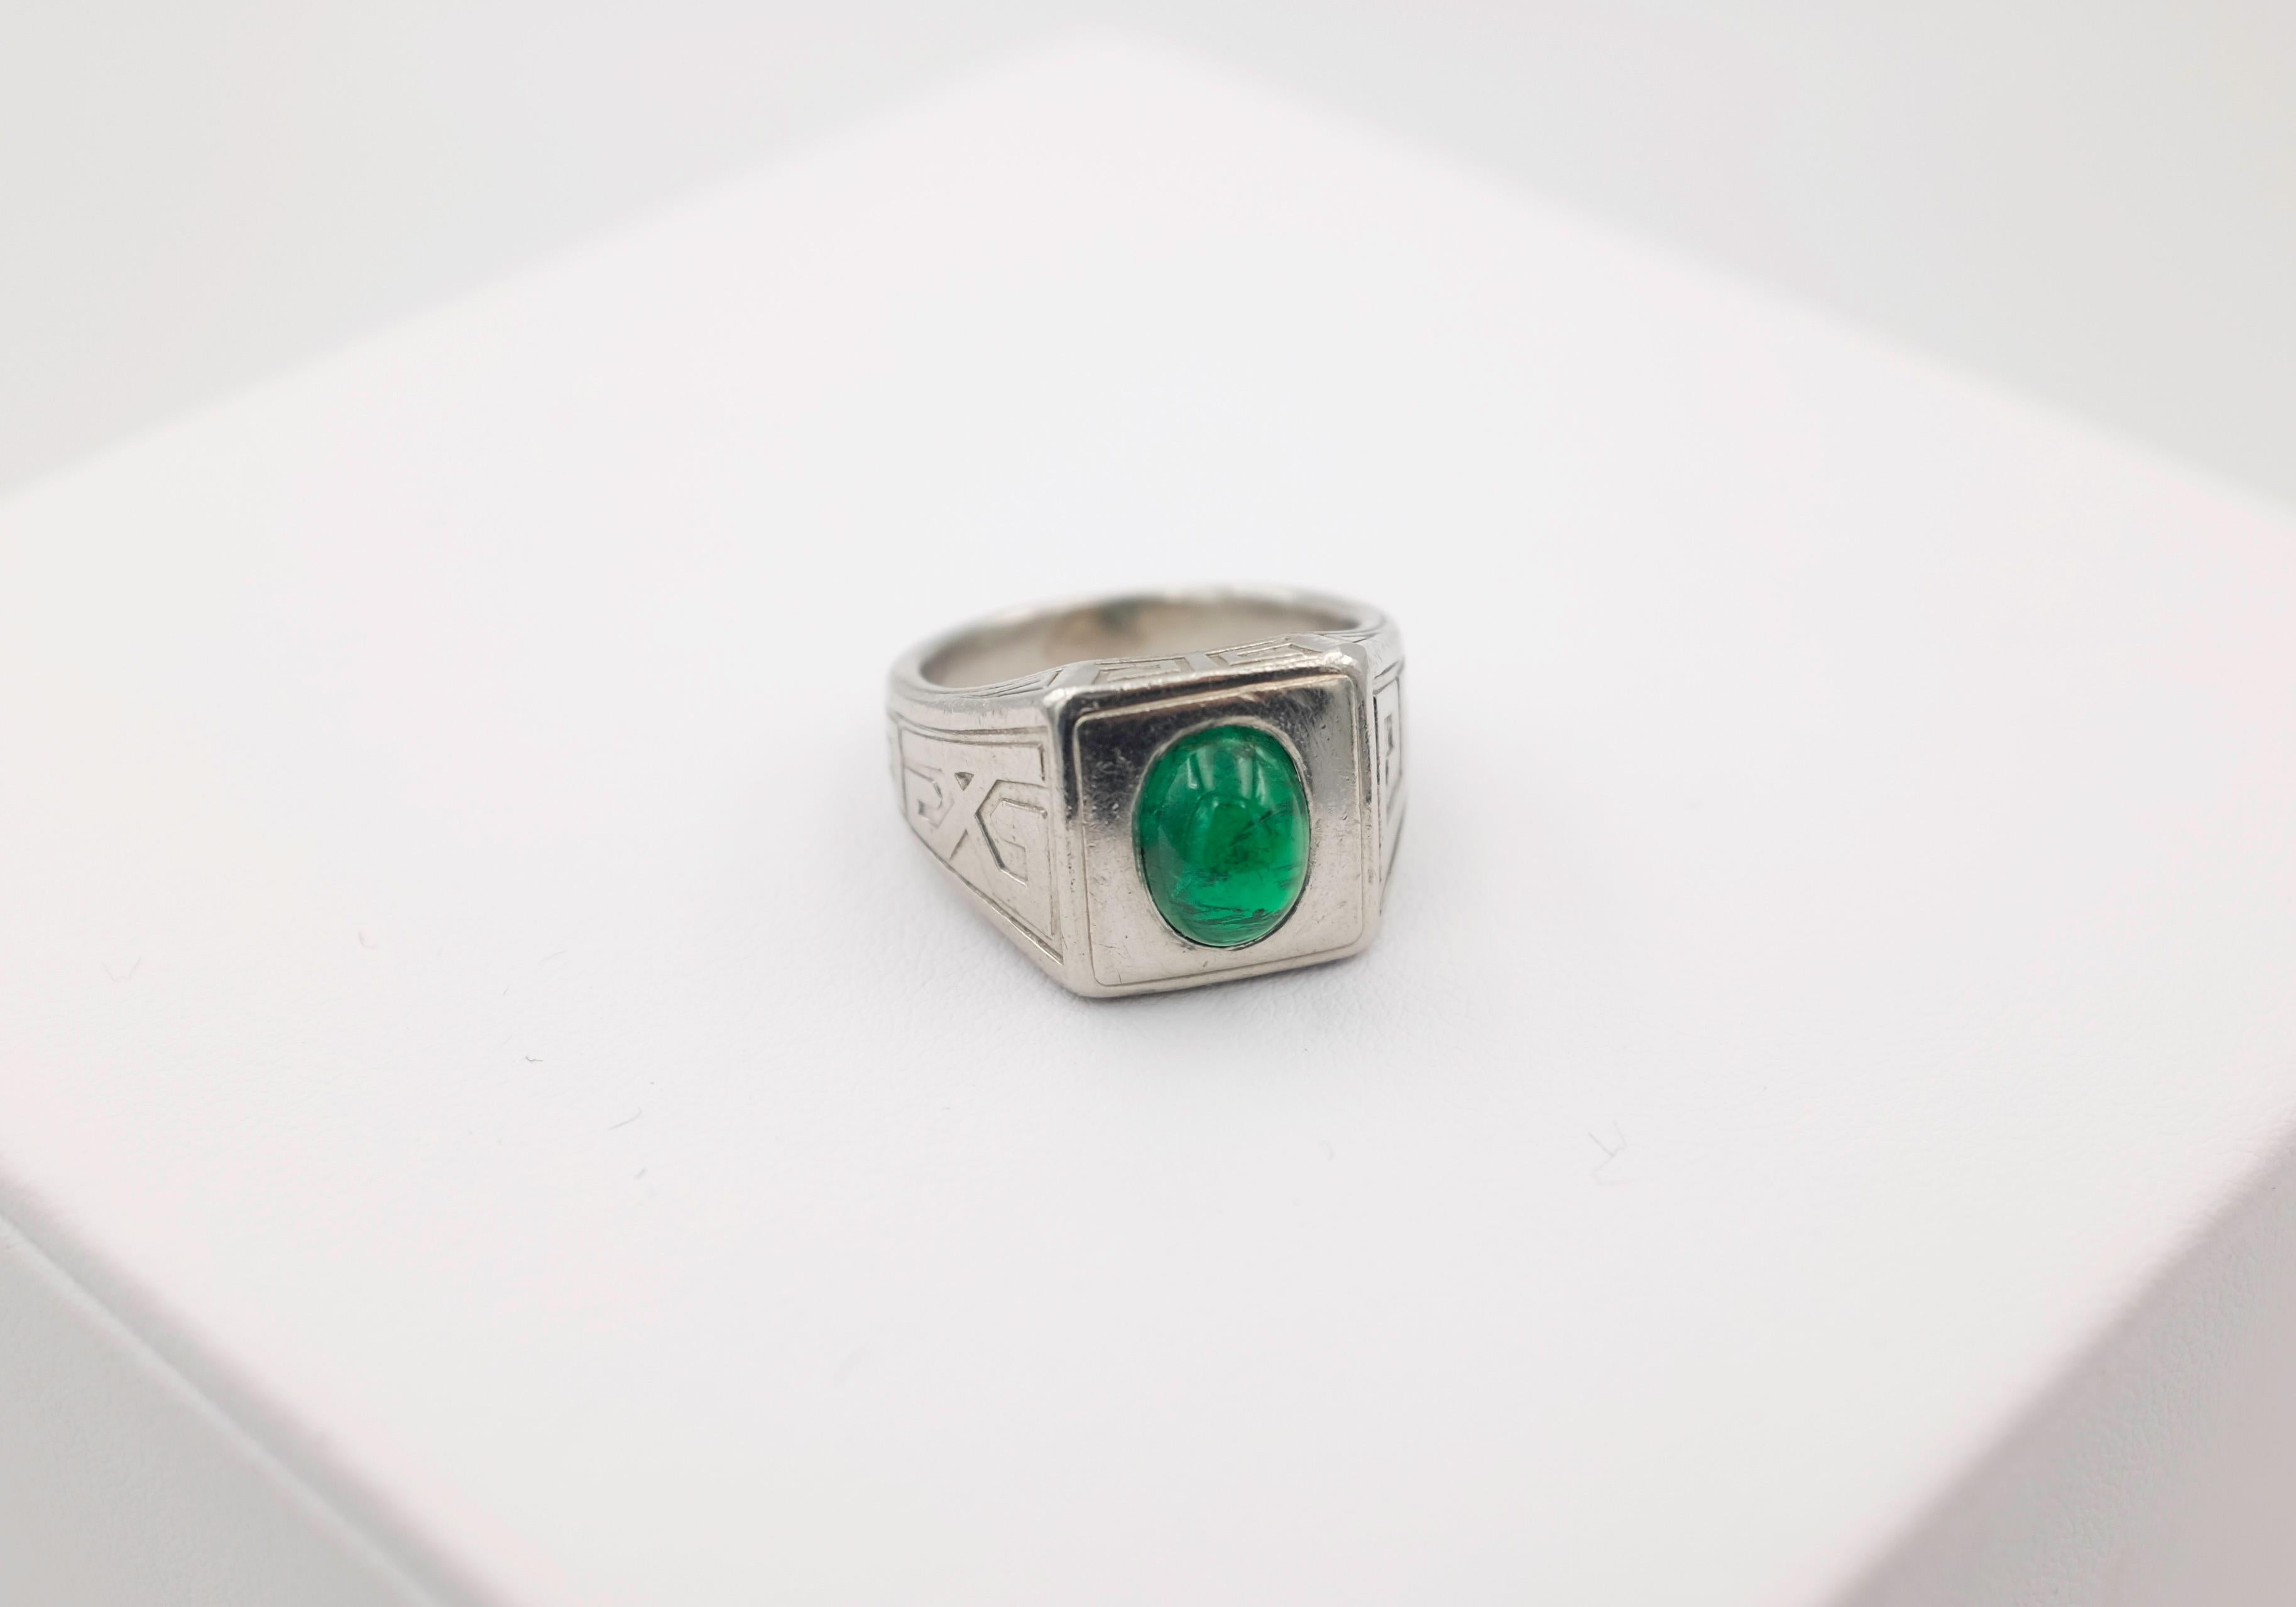 Tiffany & Co. Art Deco Egyptian Revival Ring in Platinum with Untreated Emerald In Good Condition For Sale In Miami Beach, FL